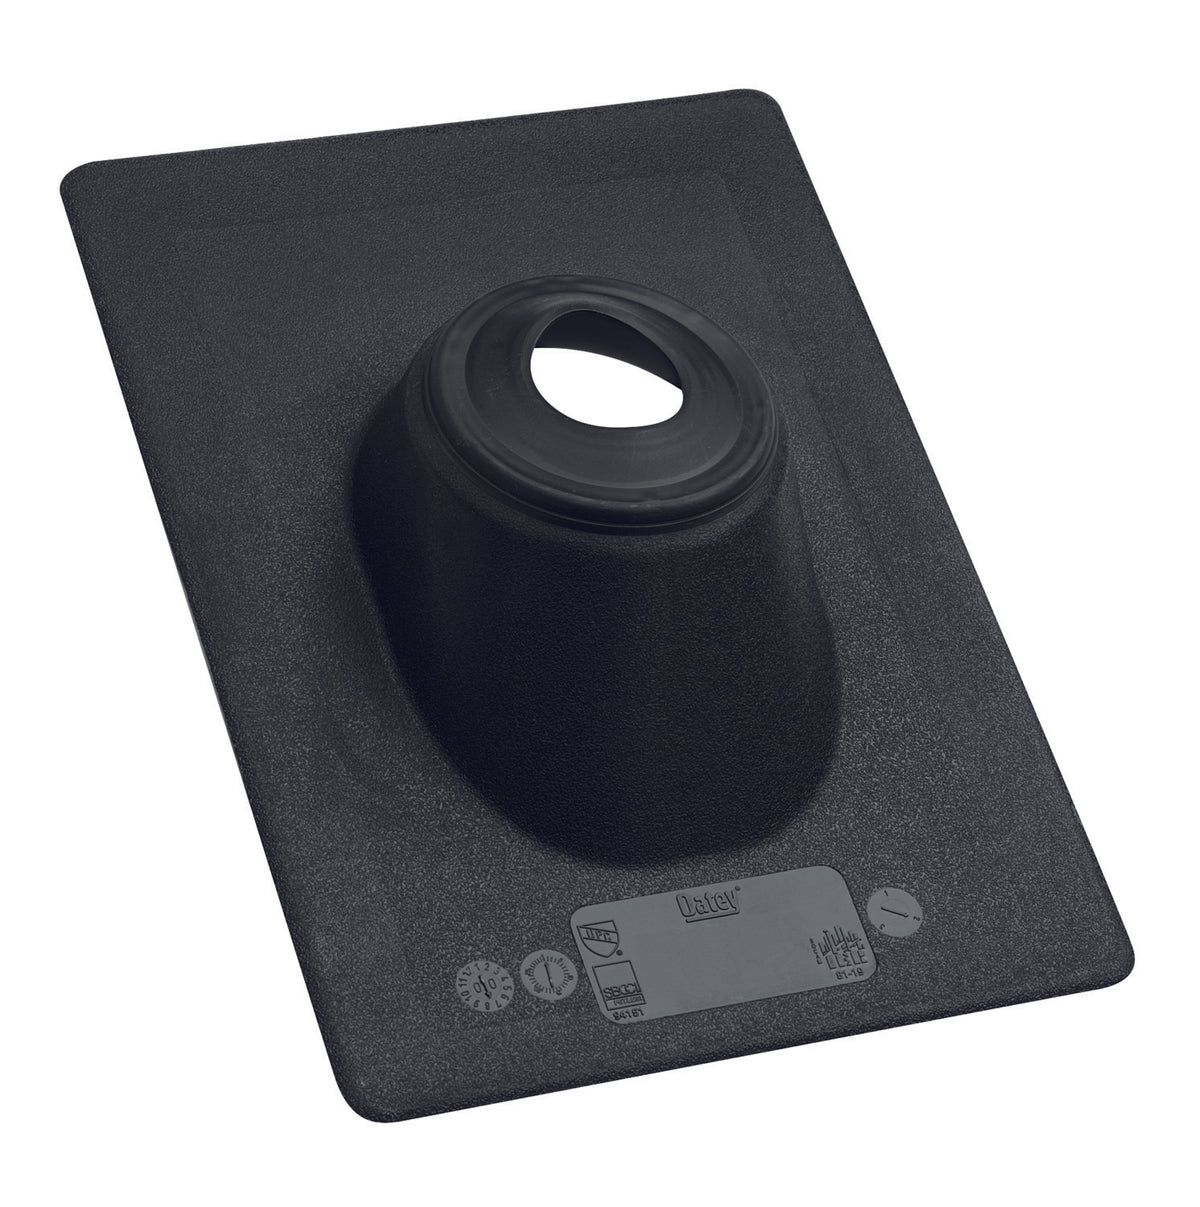 Oatey 11898 No-Calk Standard Base Roof Flashing, 1.25"x1.5", Thermoplastic